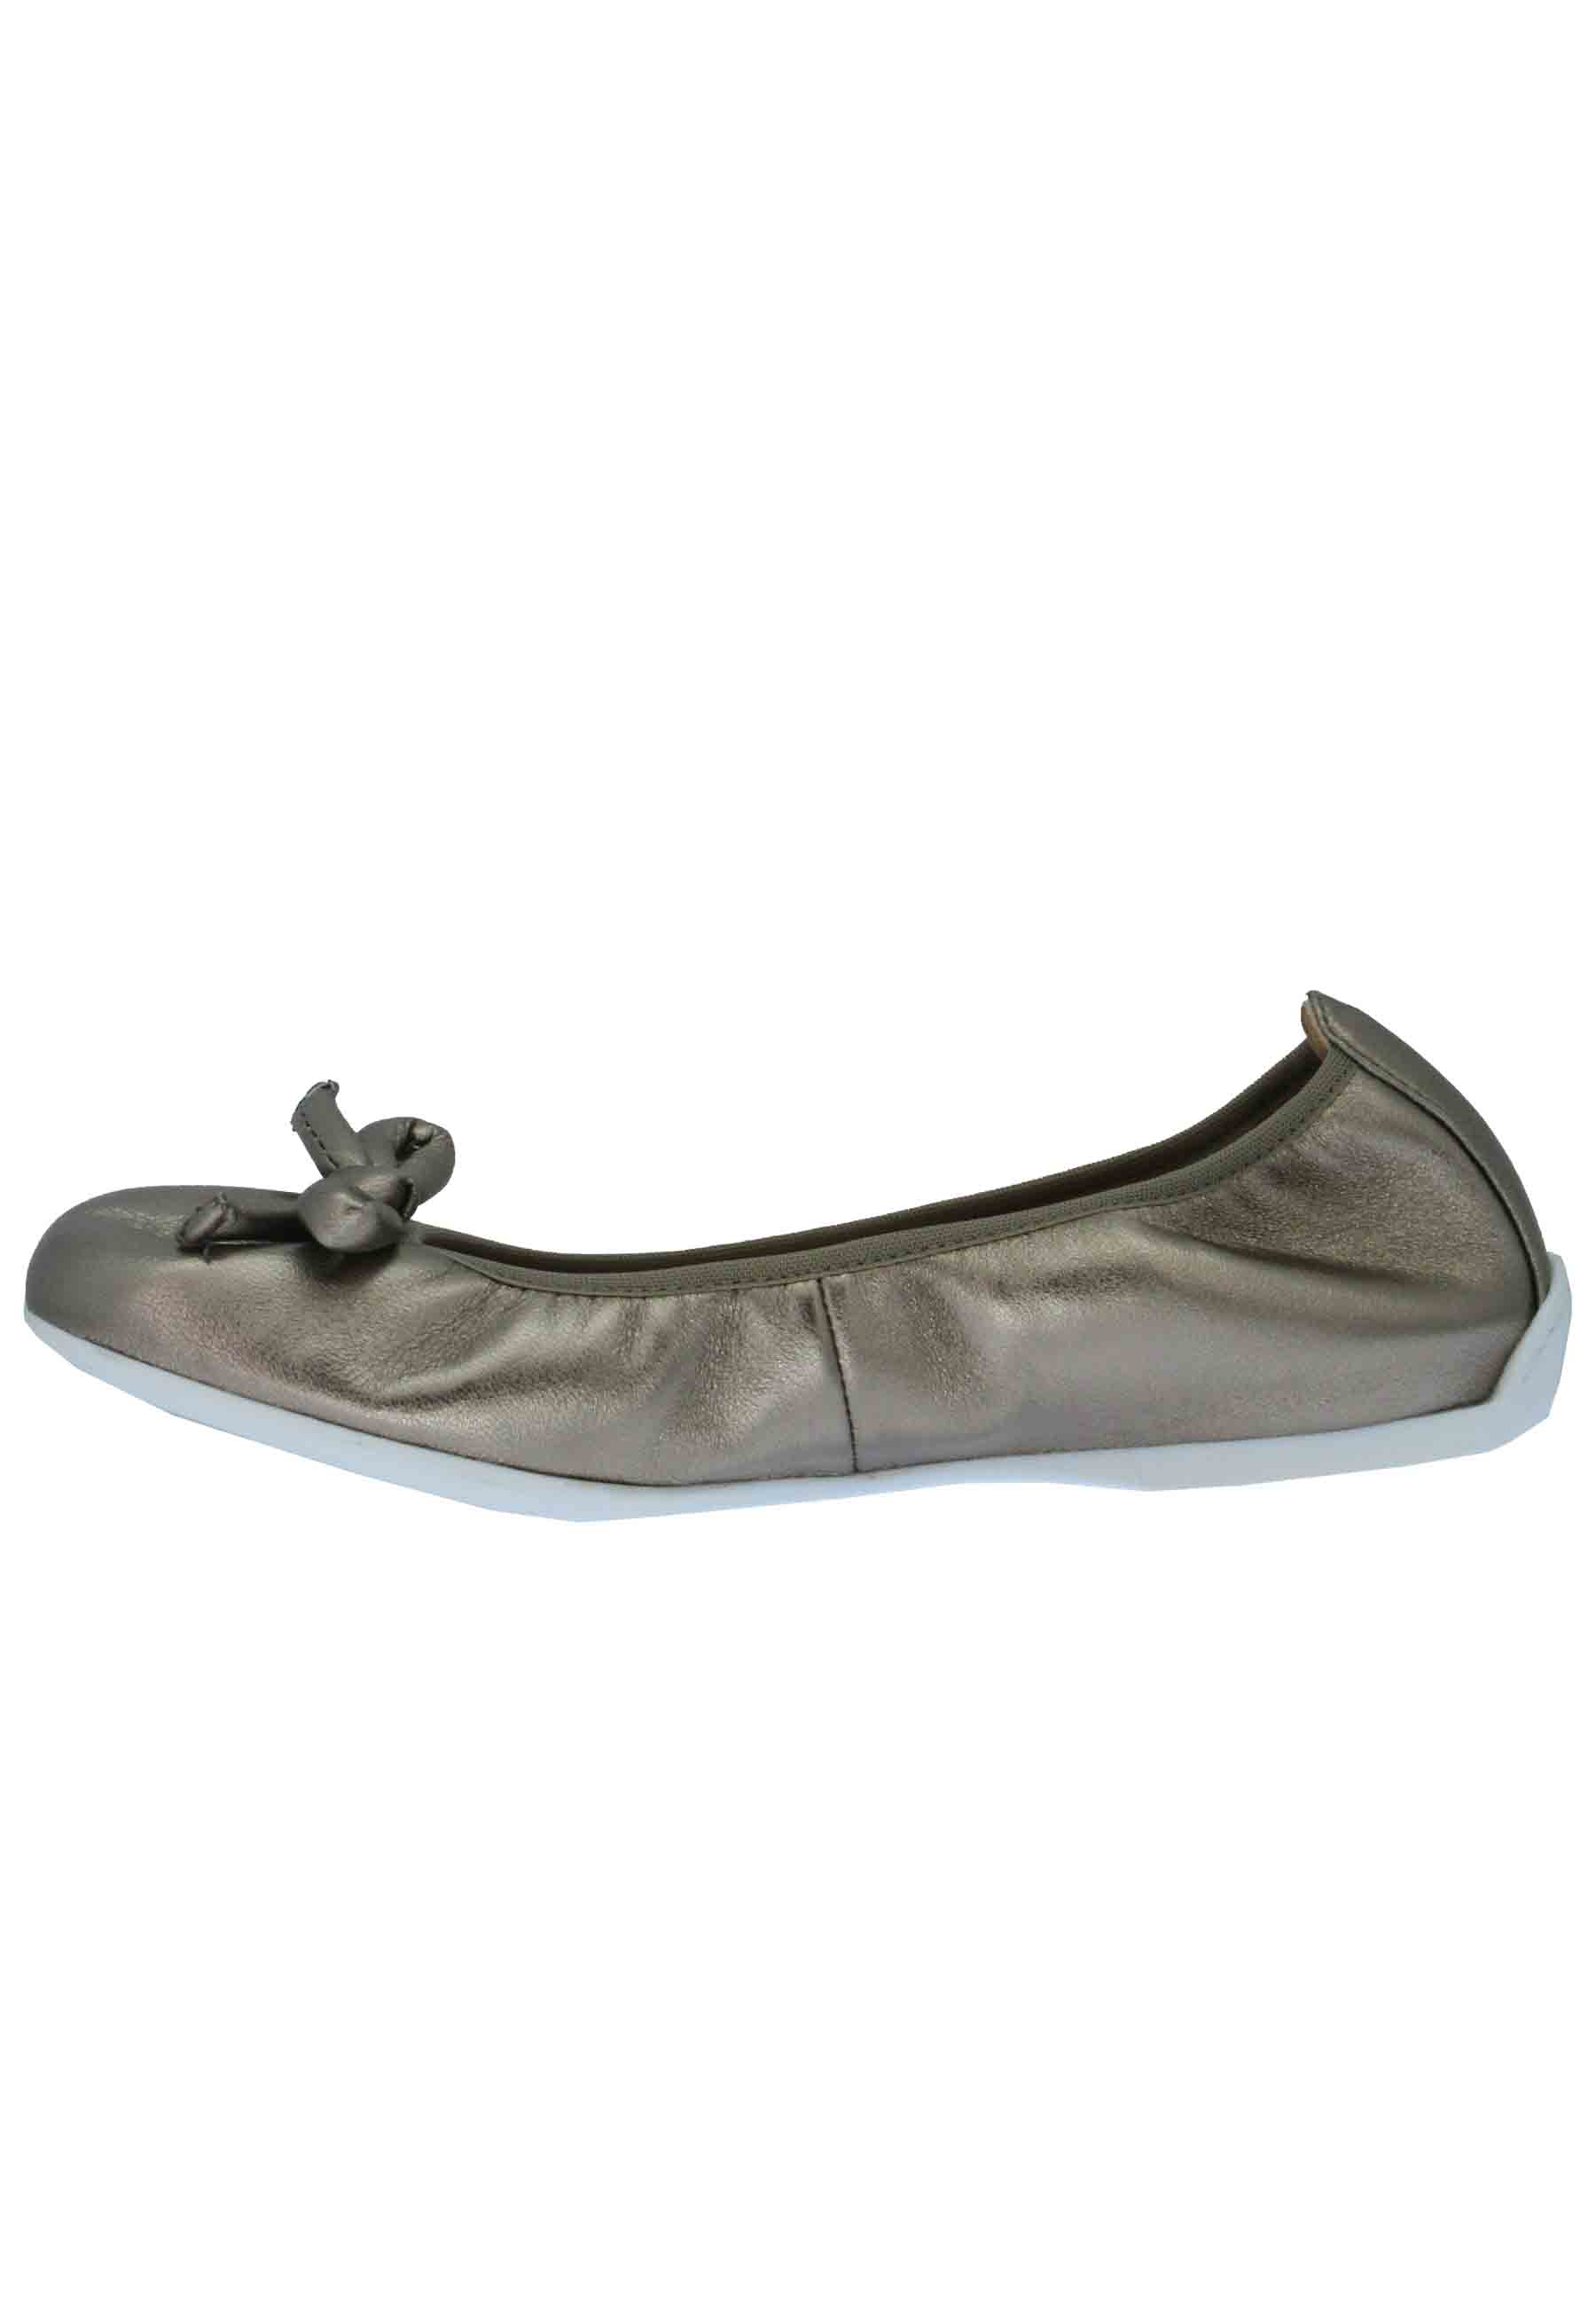 Aleda women's ballet flats in bronze leather and low rubber sole